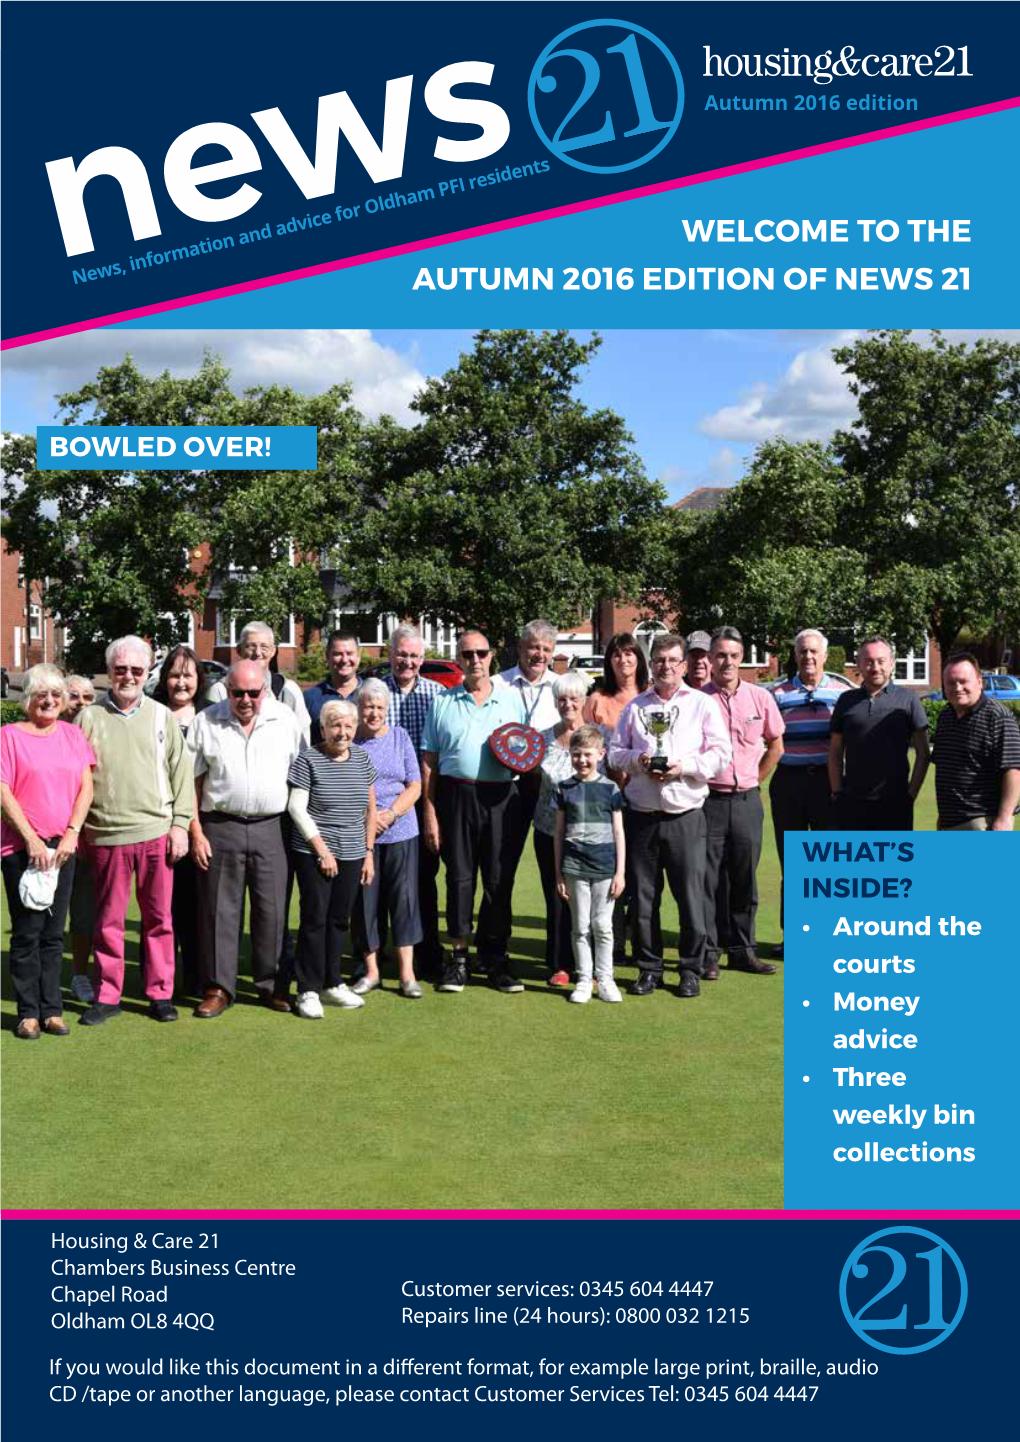 Welcome to the Autumn 2016 Edition of News 21